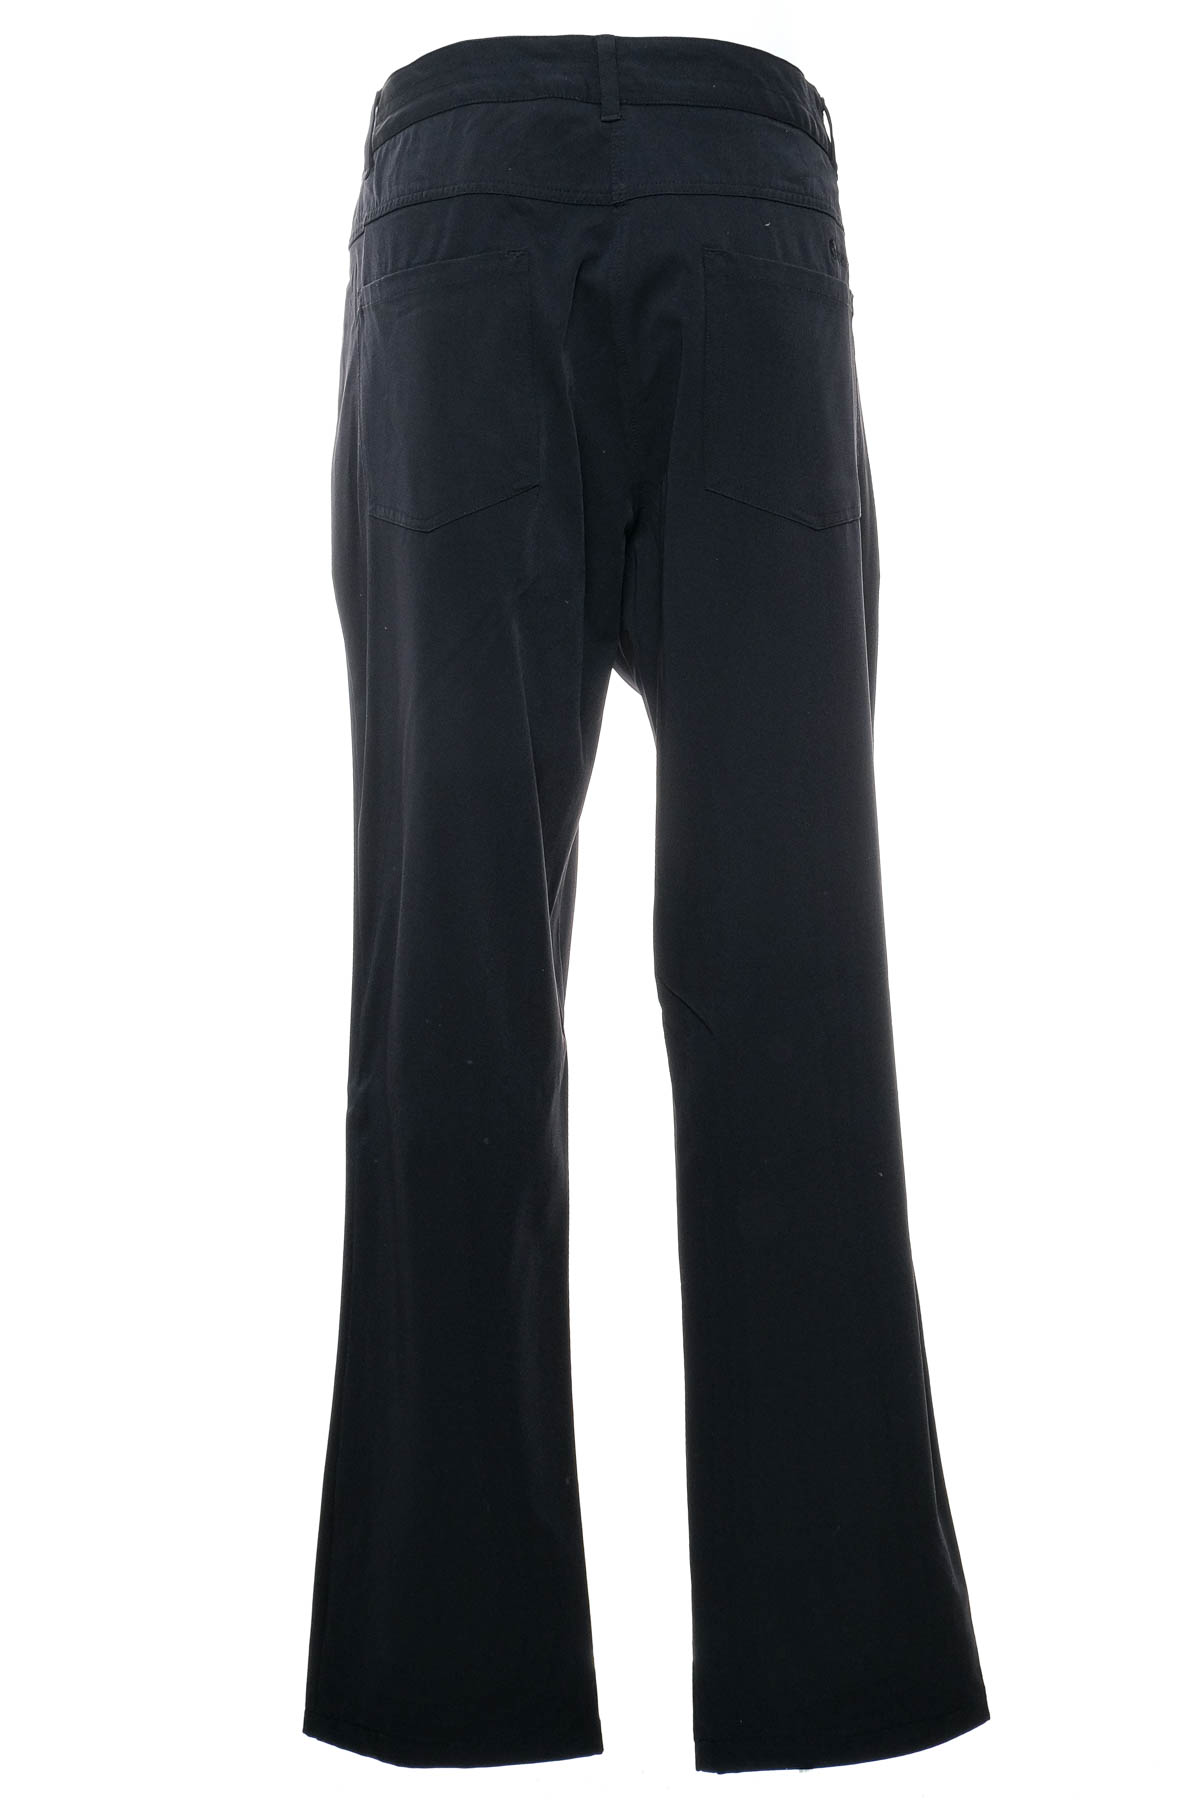 Men's trousers - BACKTEE - 1